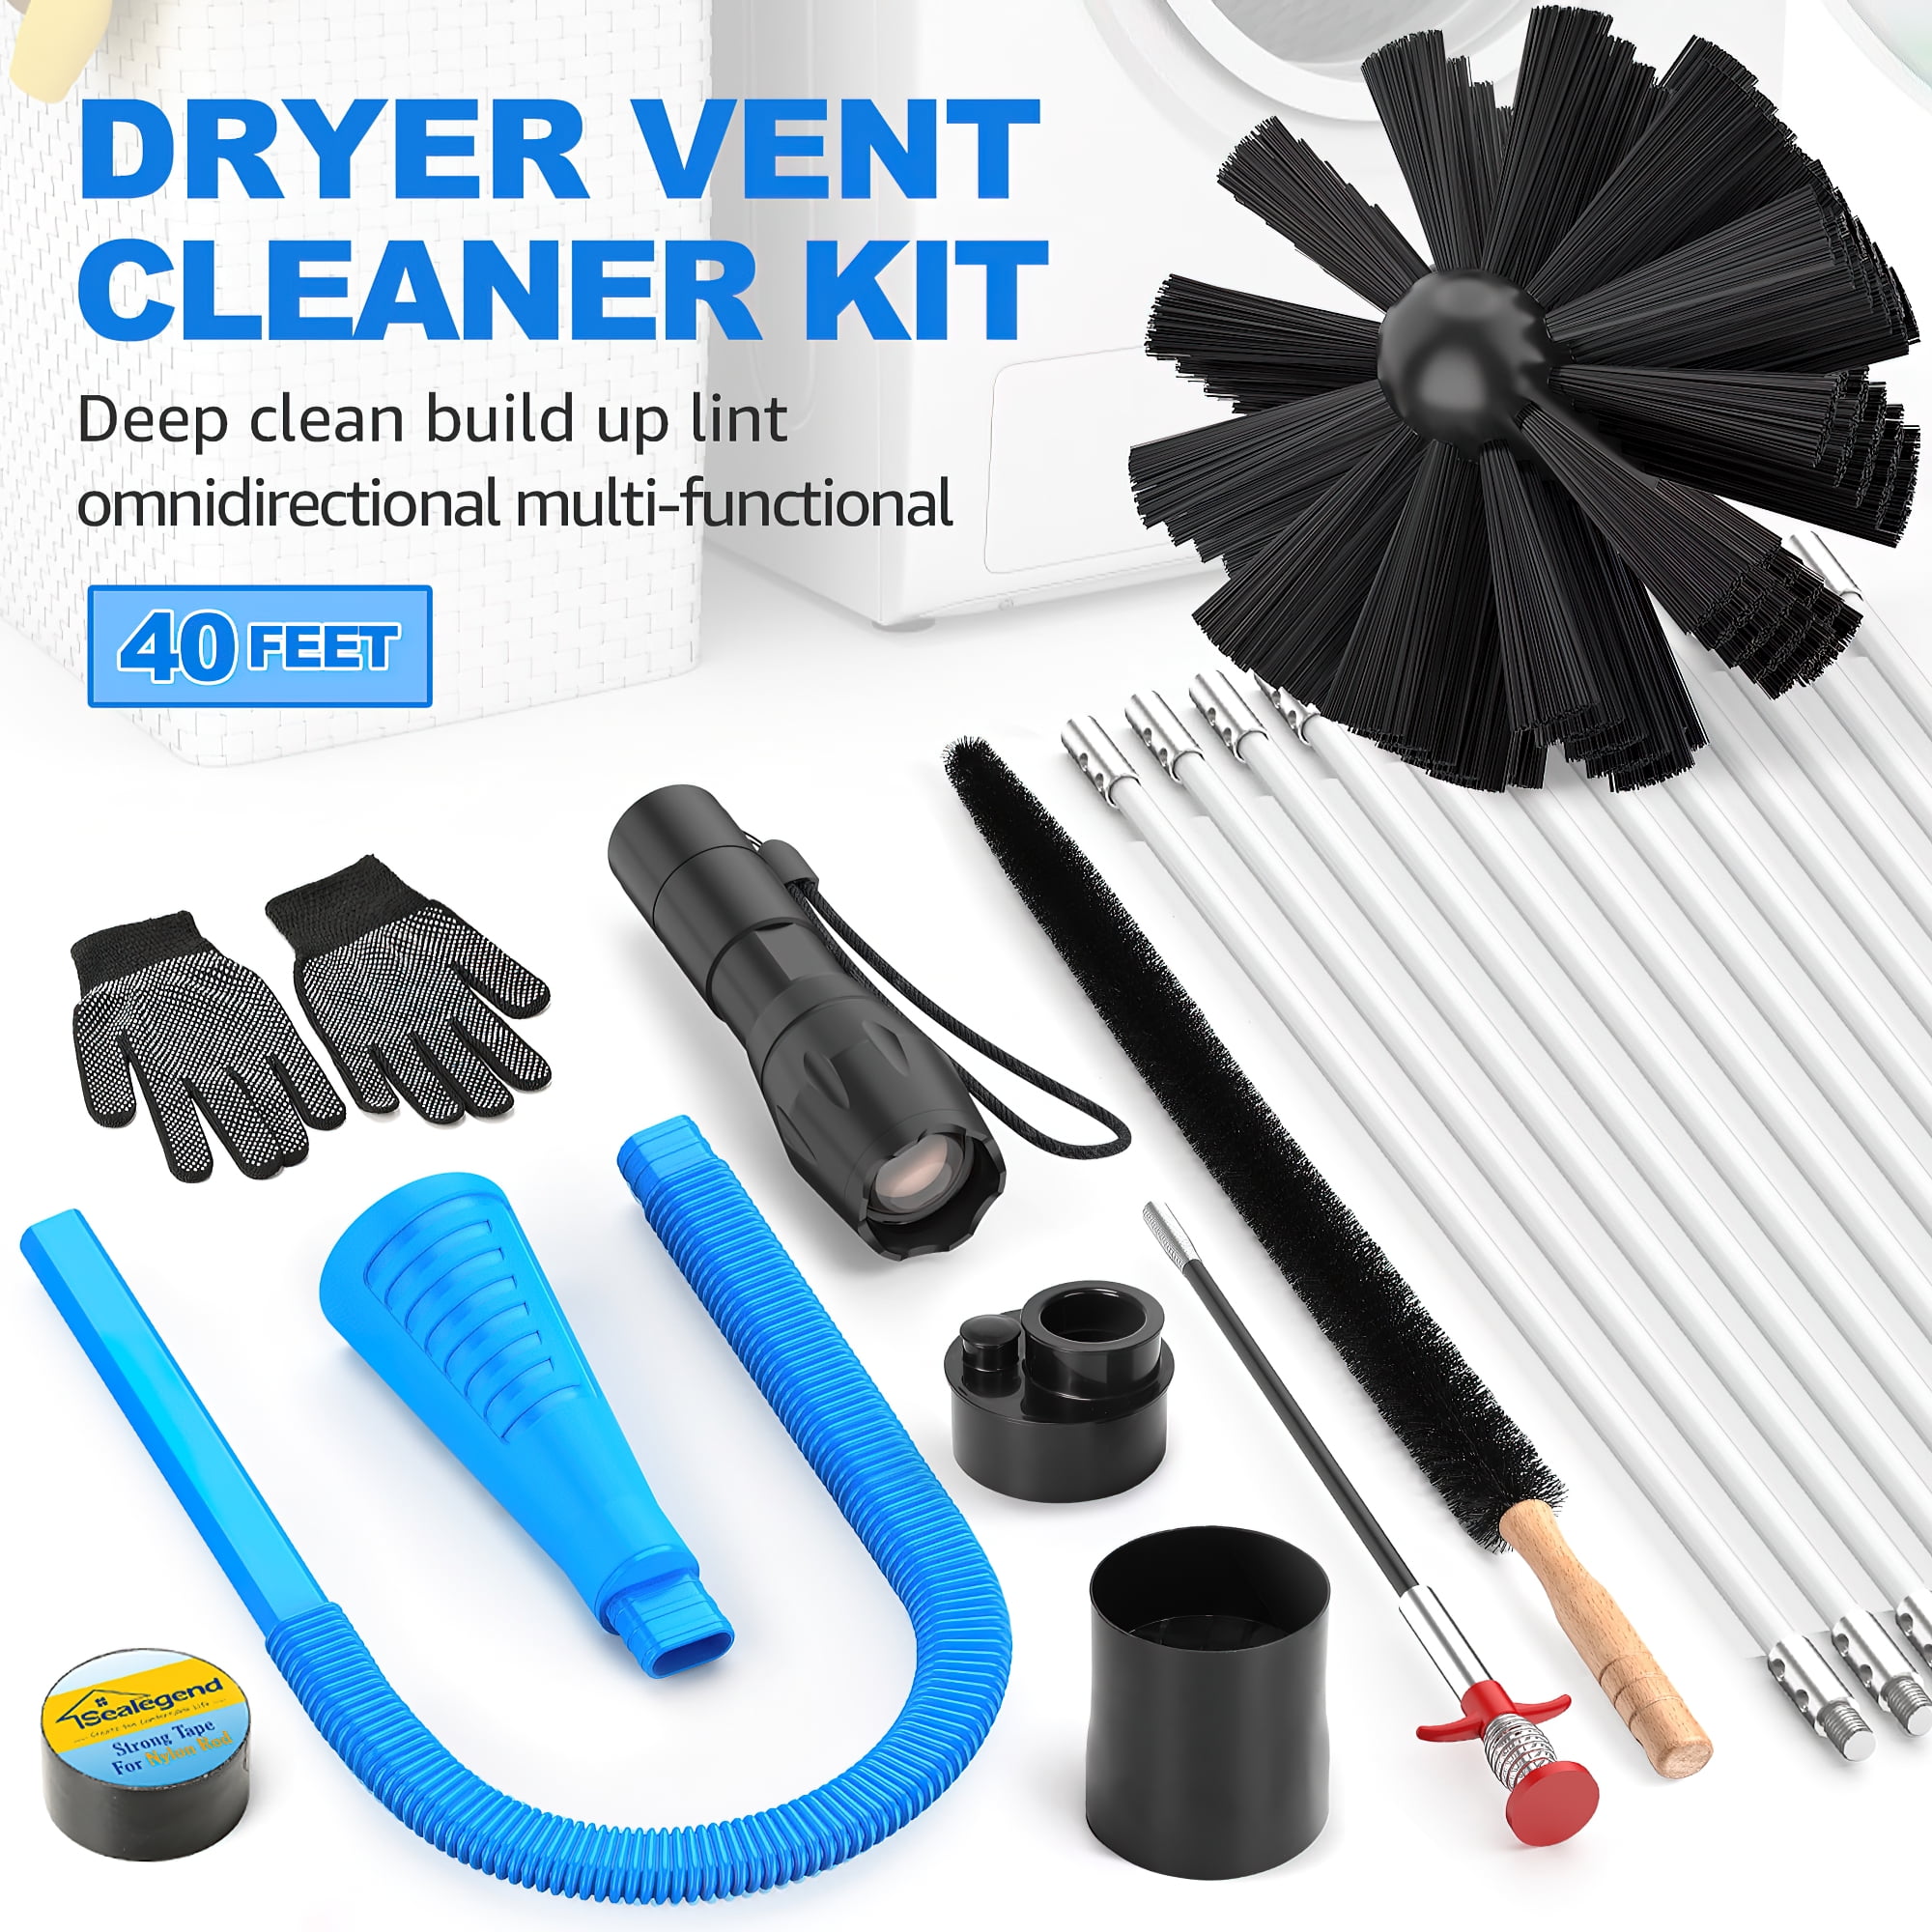 Dryvenck 20 Feet Dryer Vent Cleaner Kit,Lint Brush with Drill Attachment,Dryer  Cleaner Brush for Easy Cleaning 